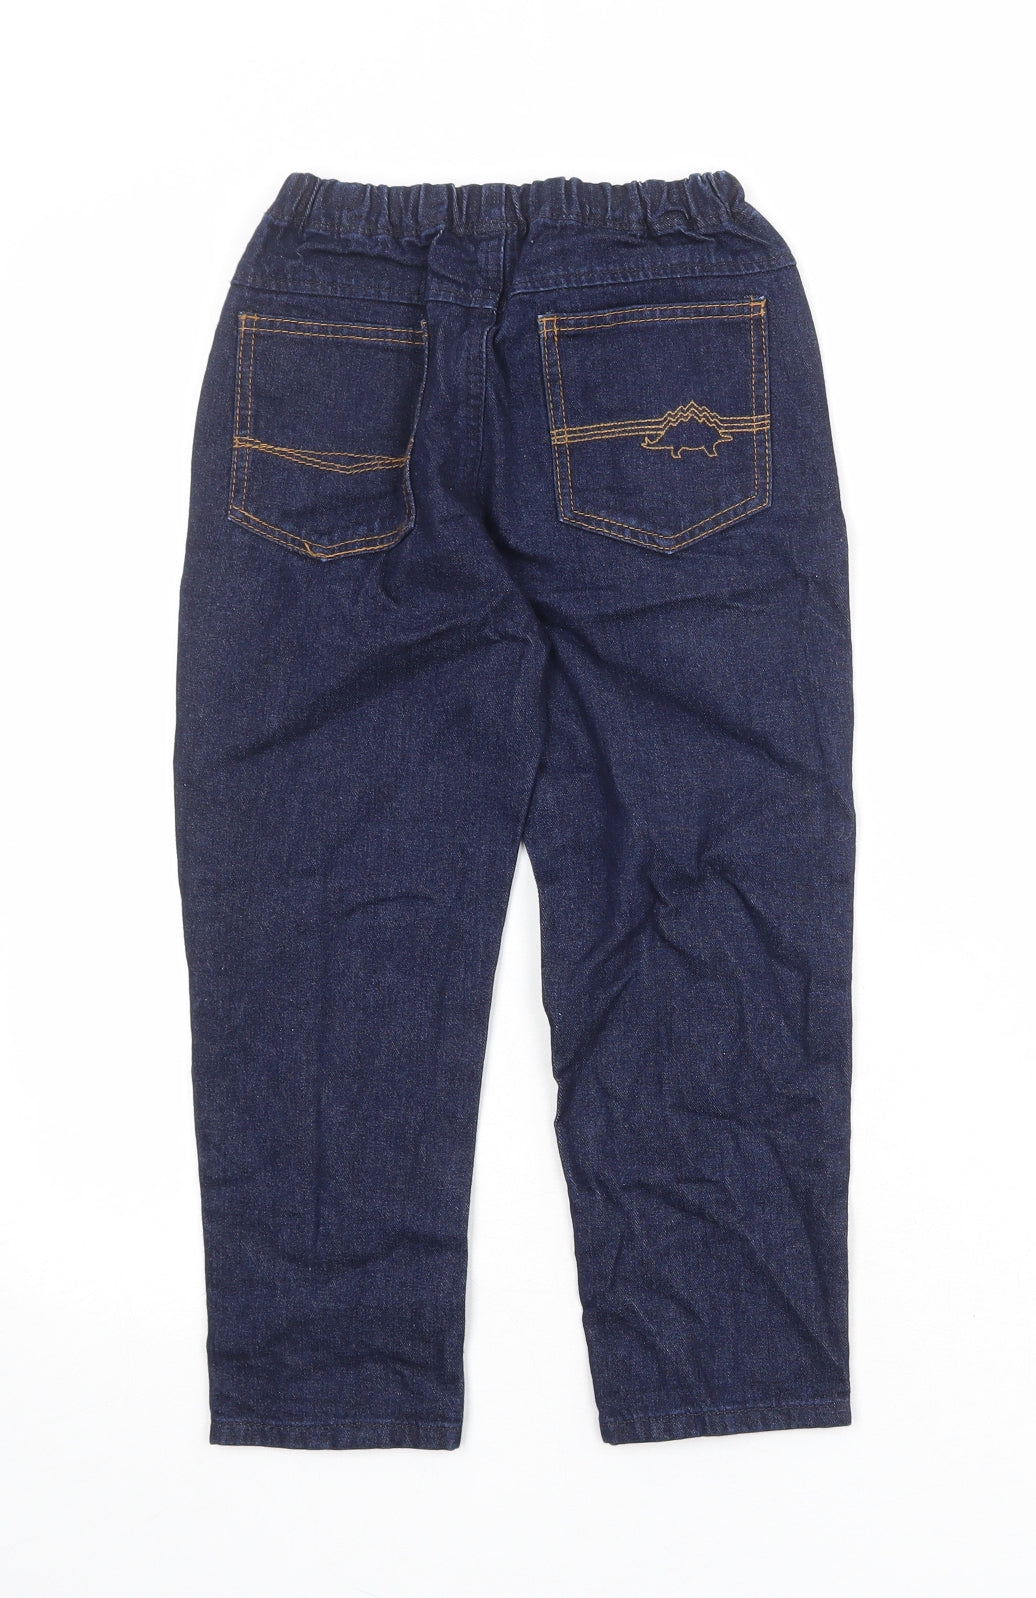 NEXT Boys Blue Coir Straight Jeans Size 6-7 Years Regular Pullover